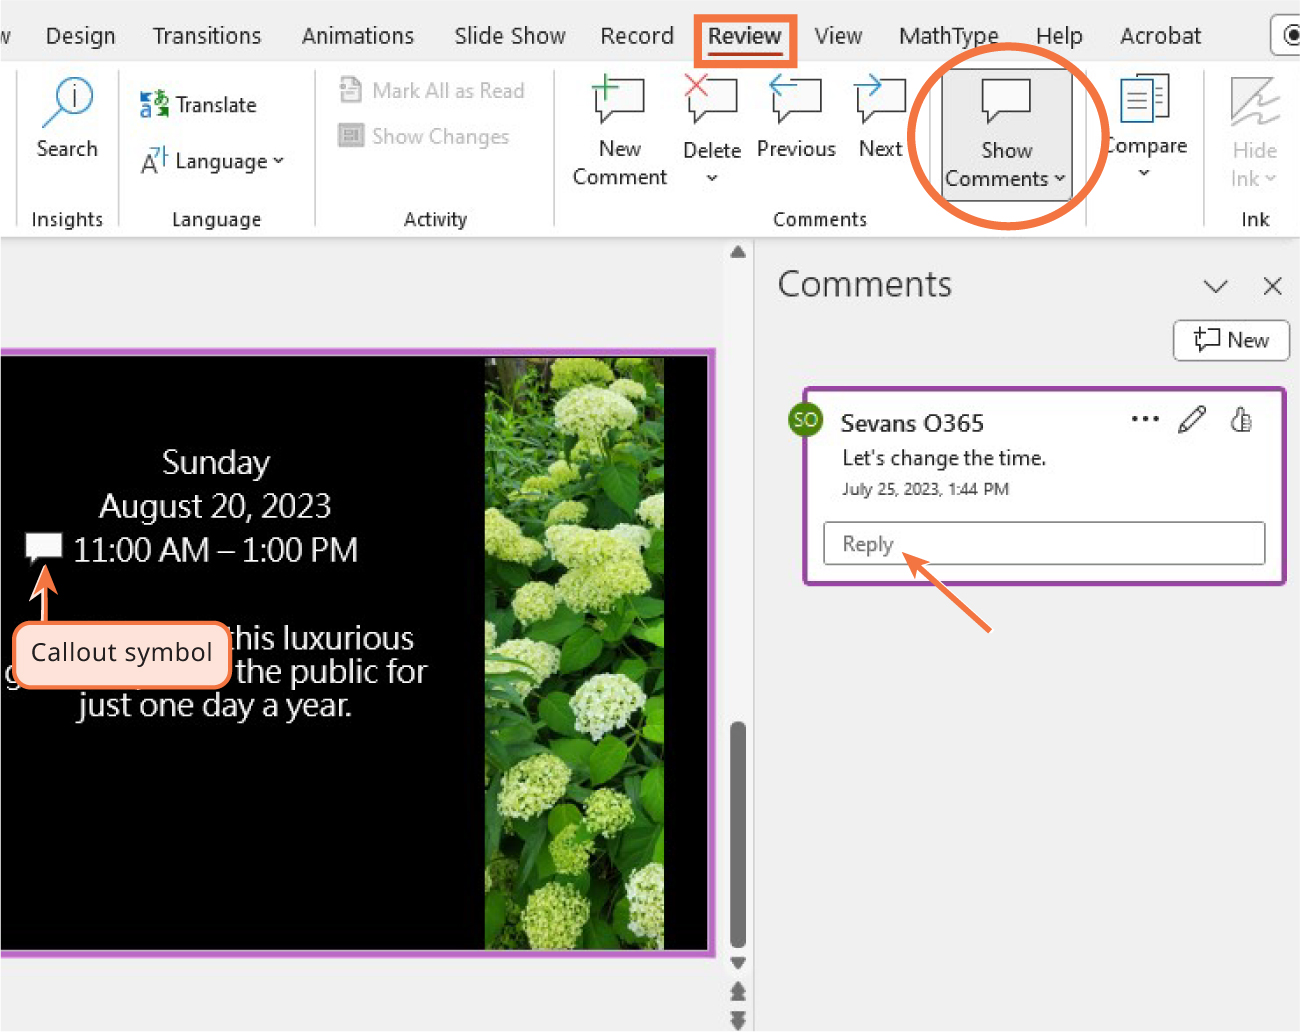 A PowerPoint screen with the Review tab selected is shown. The Show Comments feature has been clicked and an open comment bubble has been created.